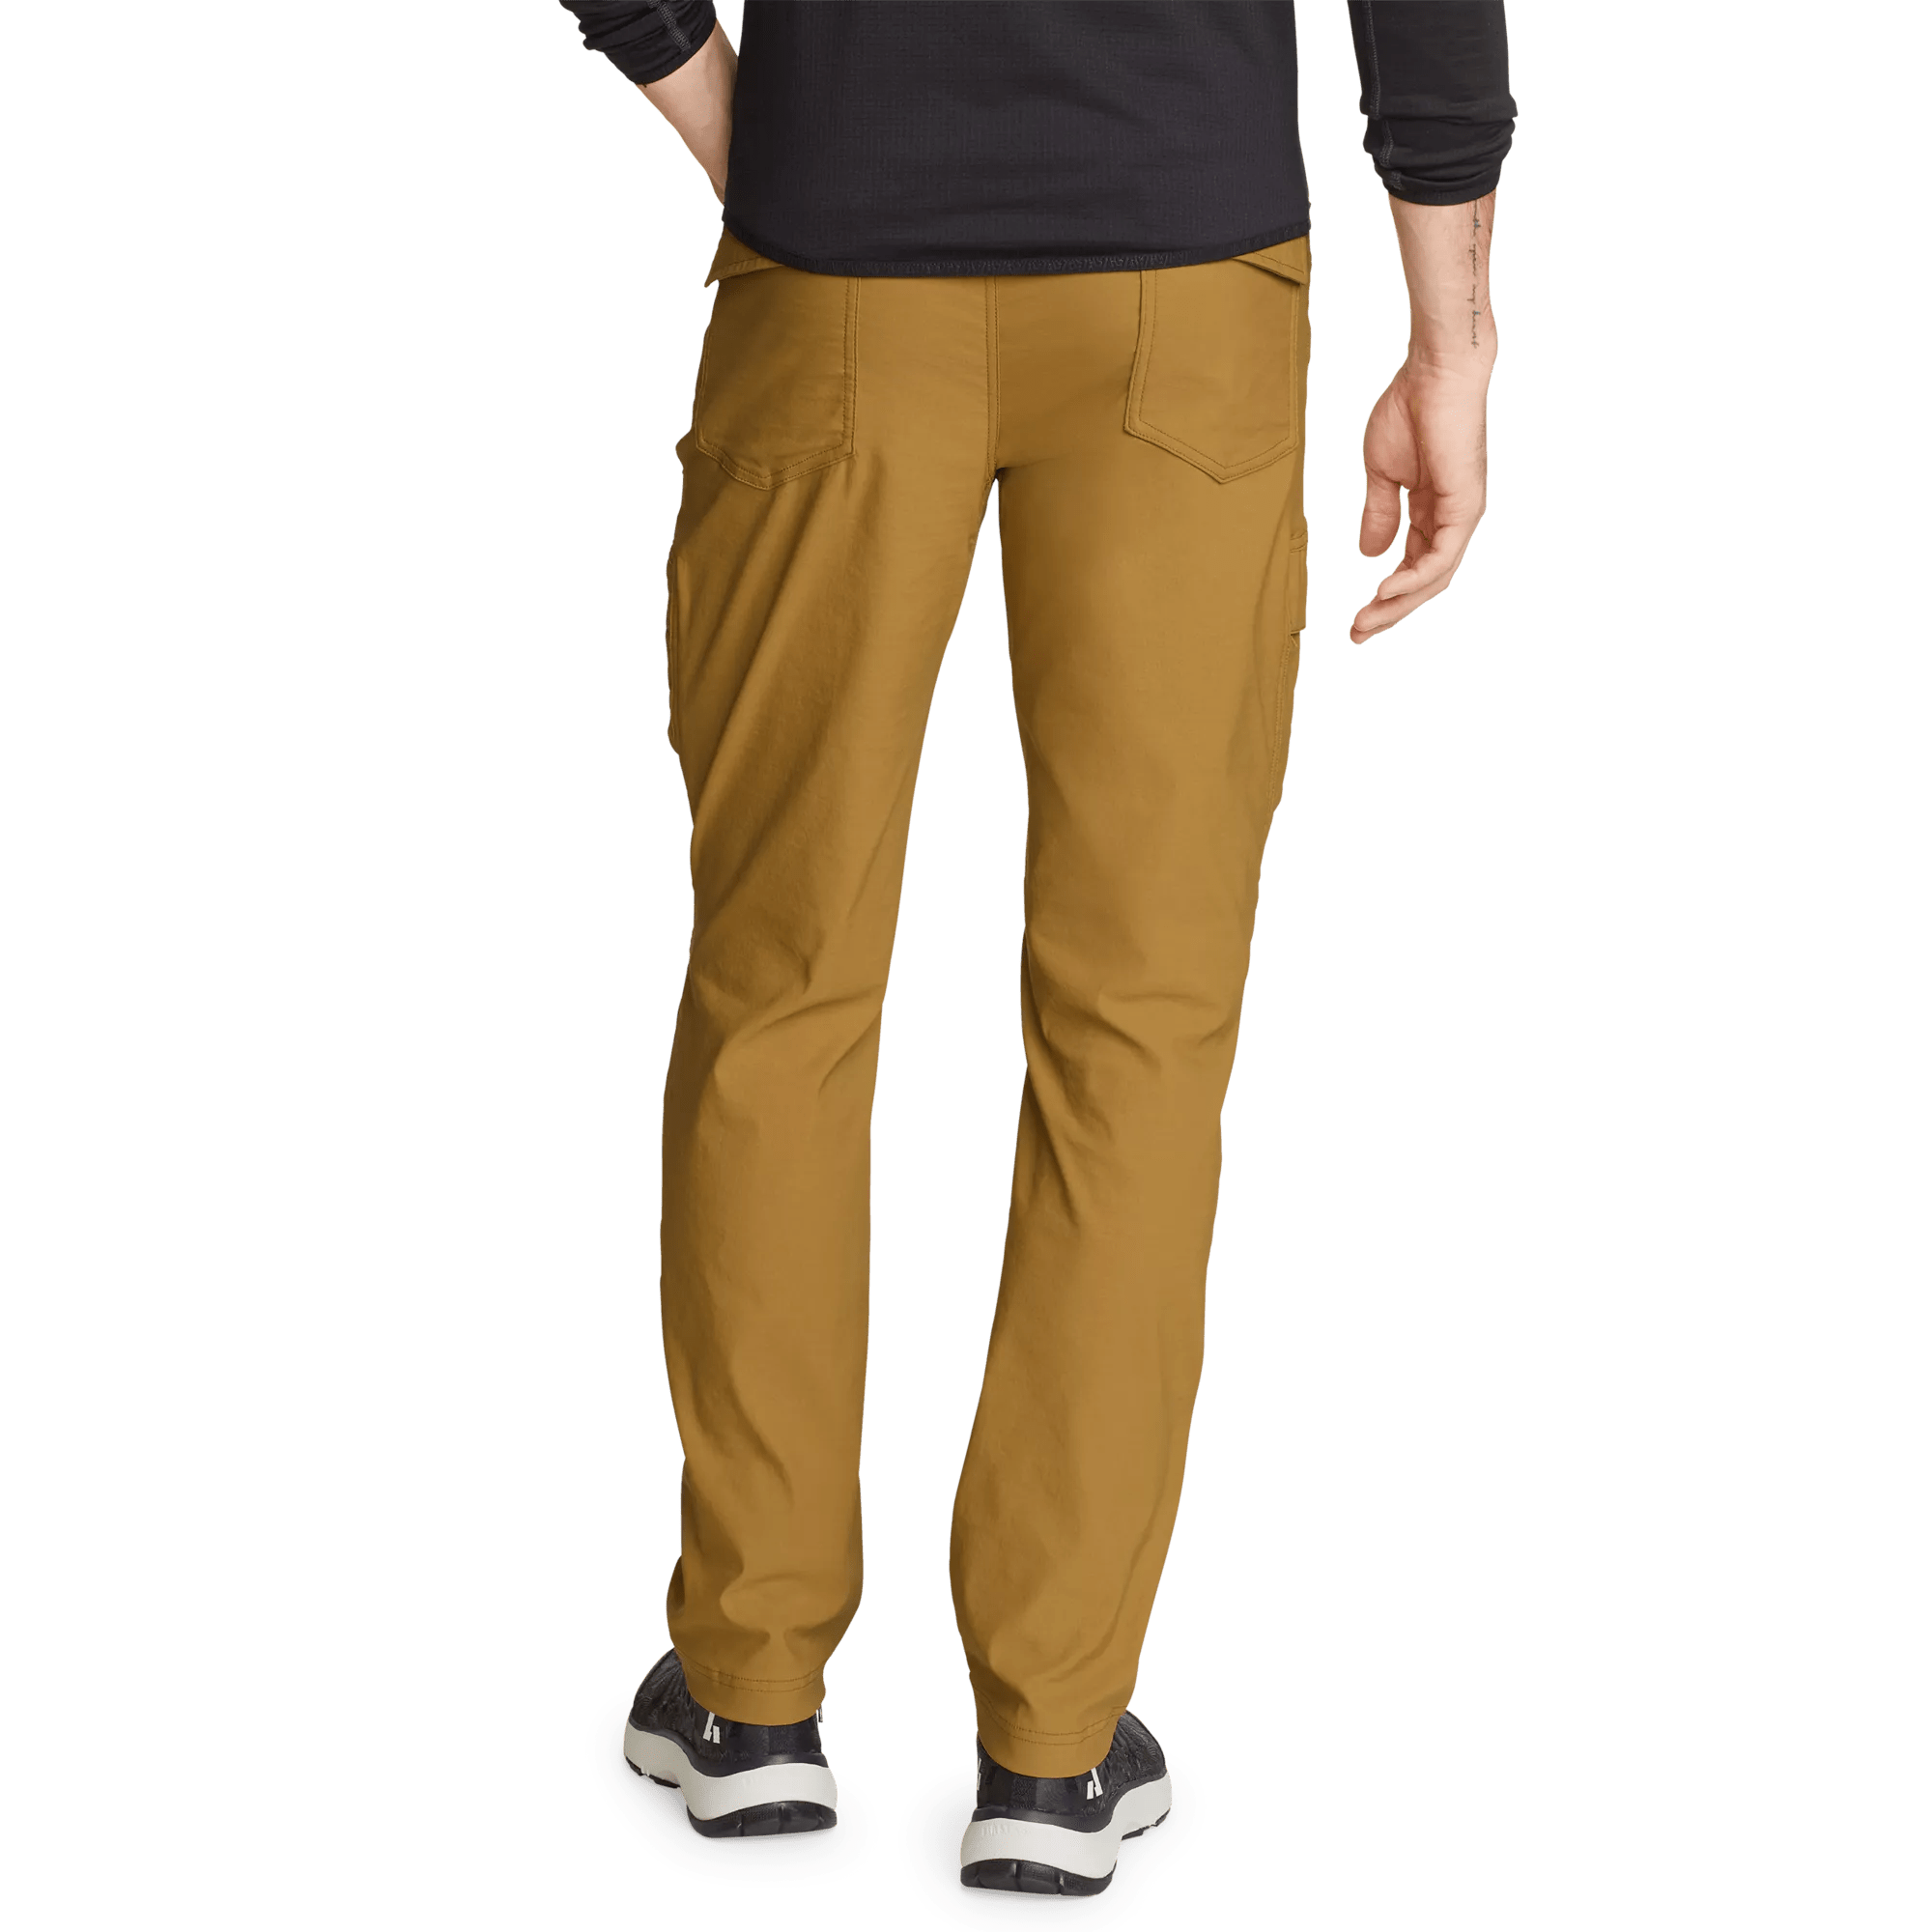 Guide Pro End-To-Ender Pants